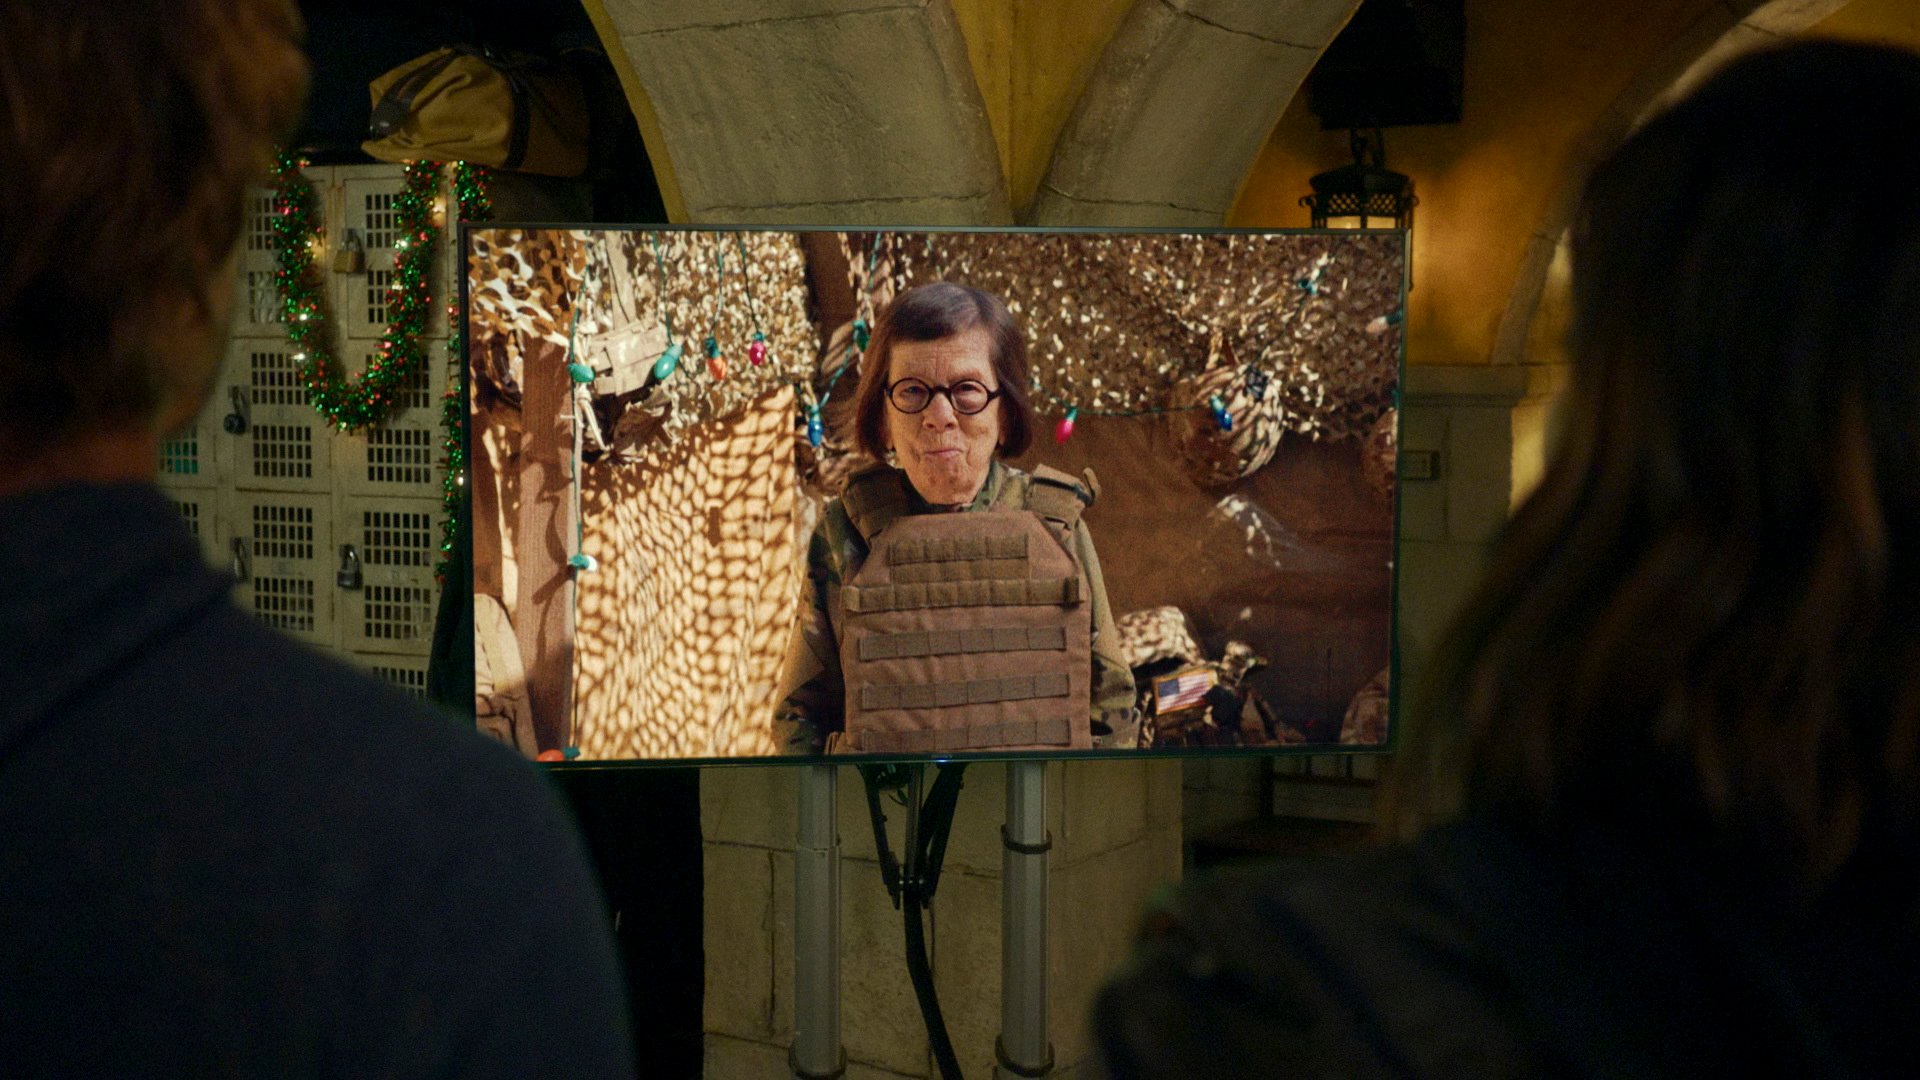 Linda Hunt appears in a scene from NCIS: Los Angeles, wearing a military outfit